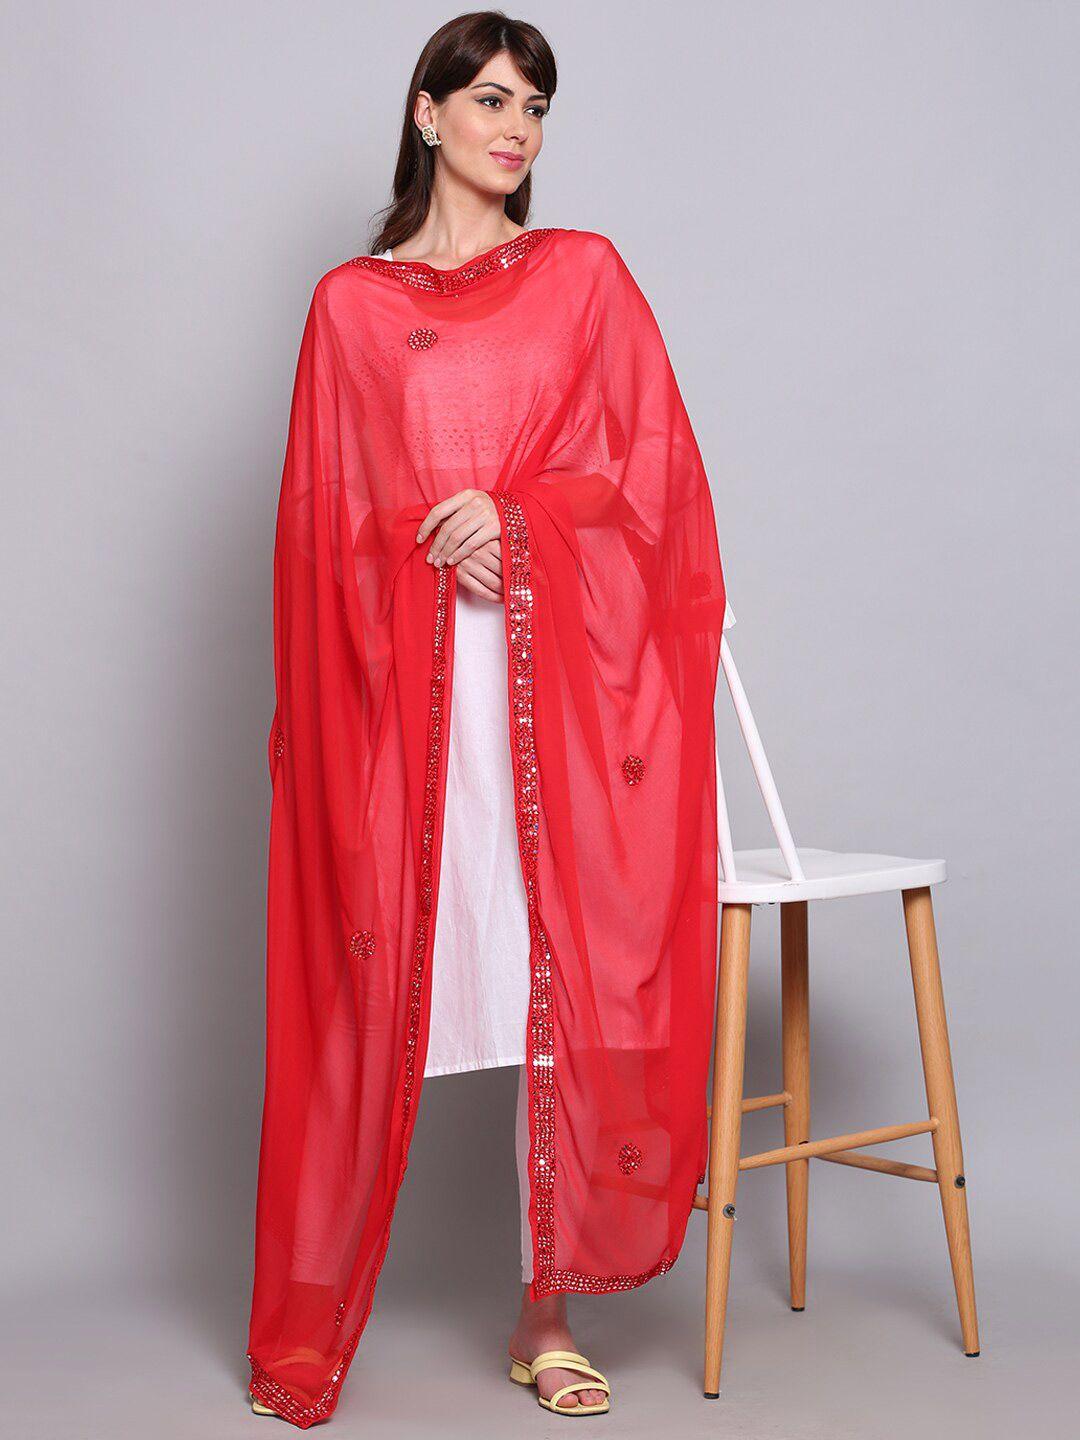 miaz lifestyle red & silver-toned ethnic motifs woven design dupatta with mirror work